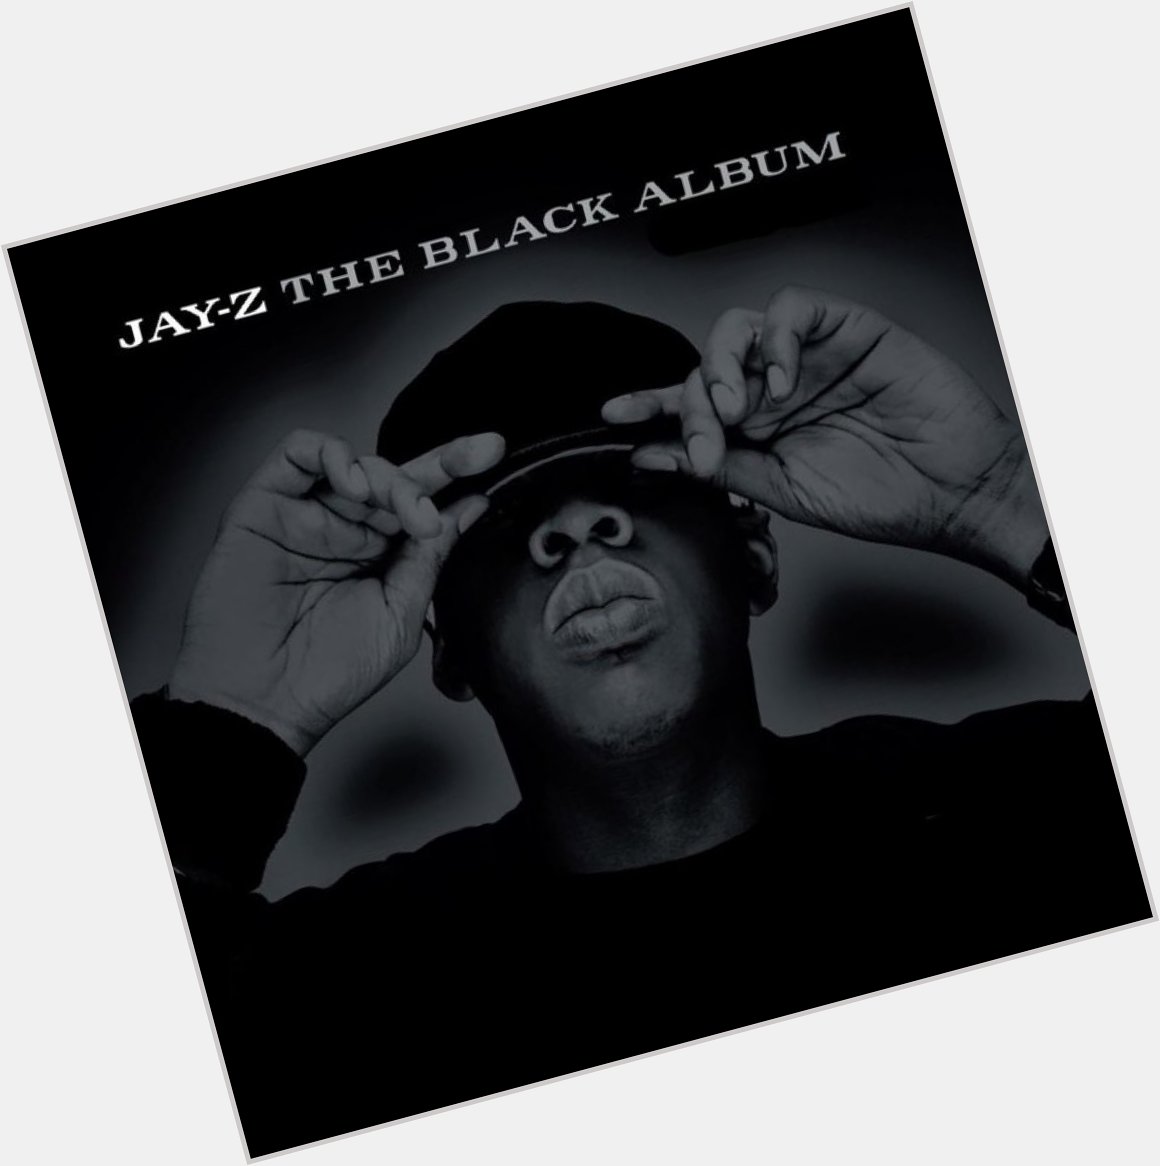 Happy 19th birthday to The Black Album. an absolute classic and Top 3 Jay Z. Favorite songs? 